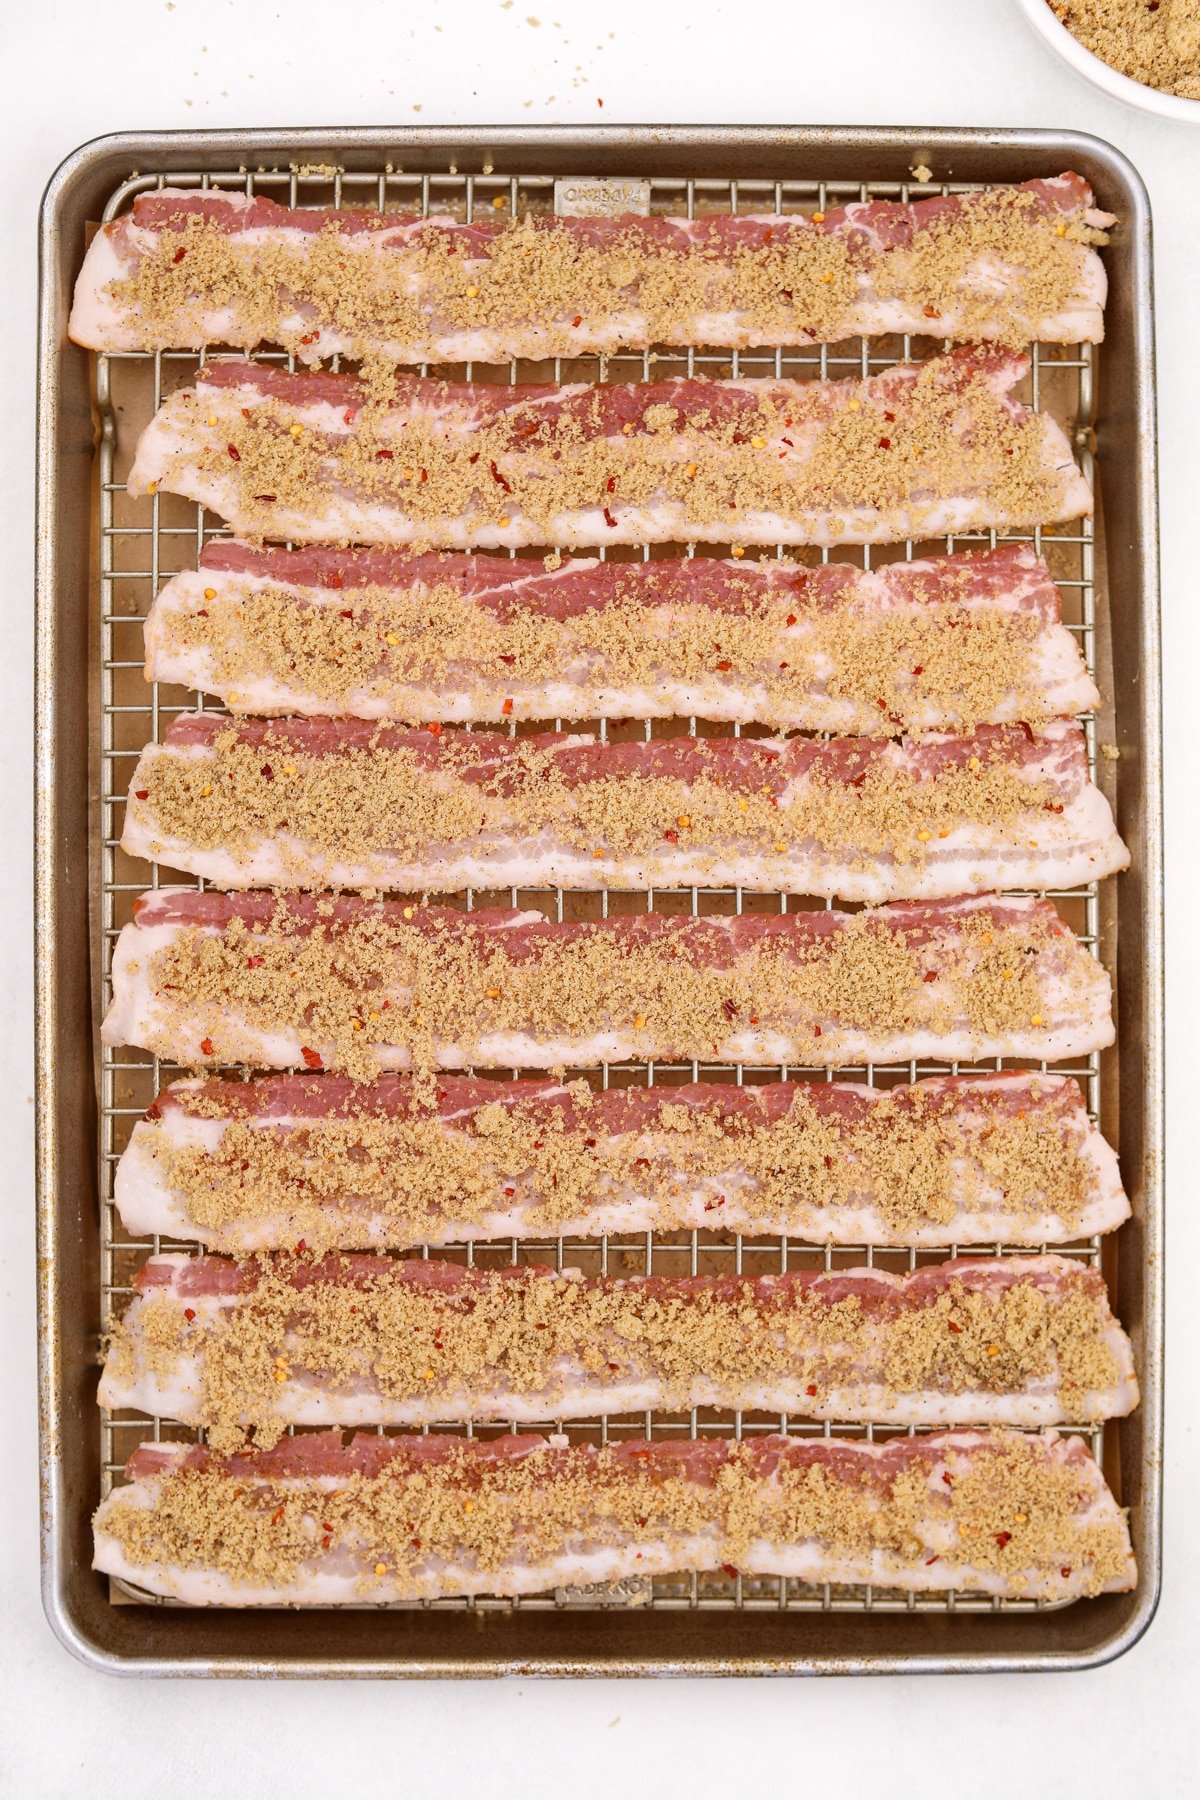 A baking sheet with bacon spread out, topped with a brown sugar rub.